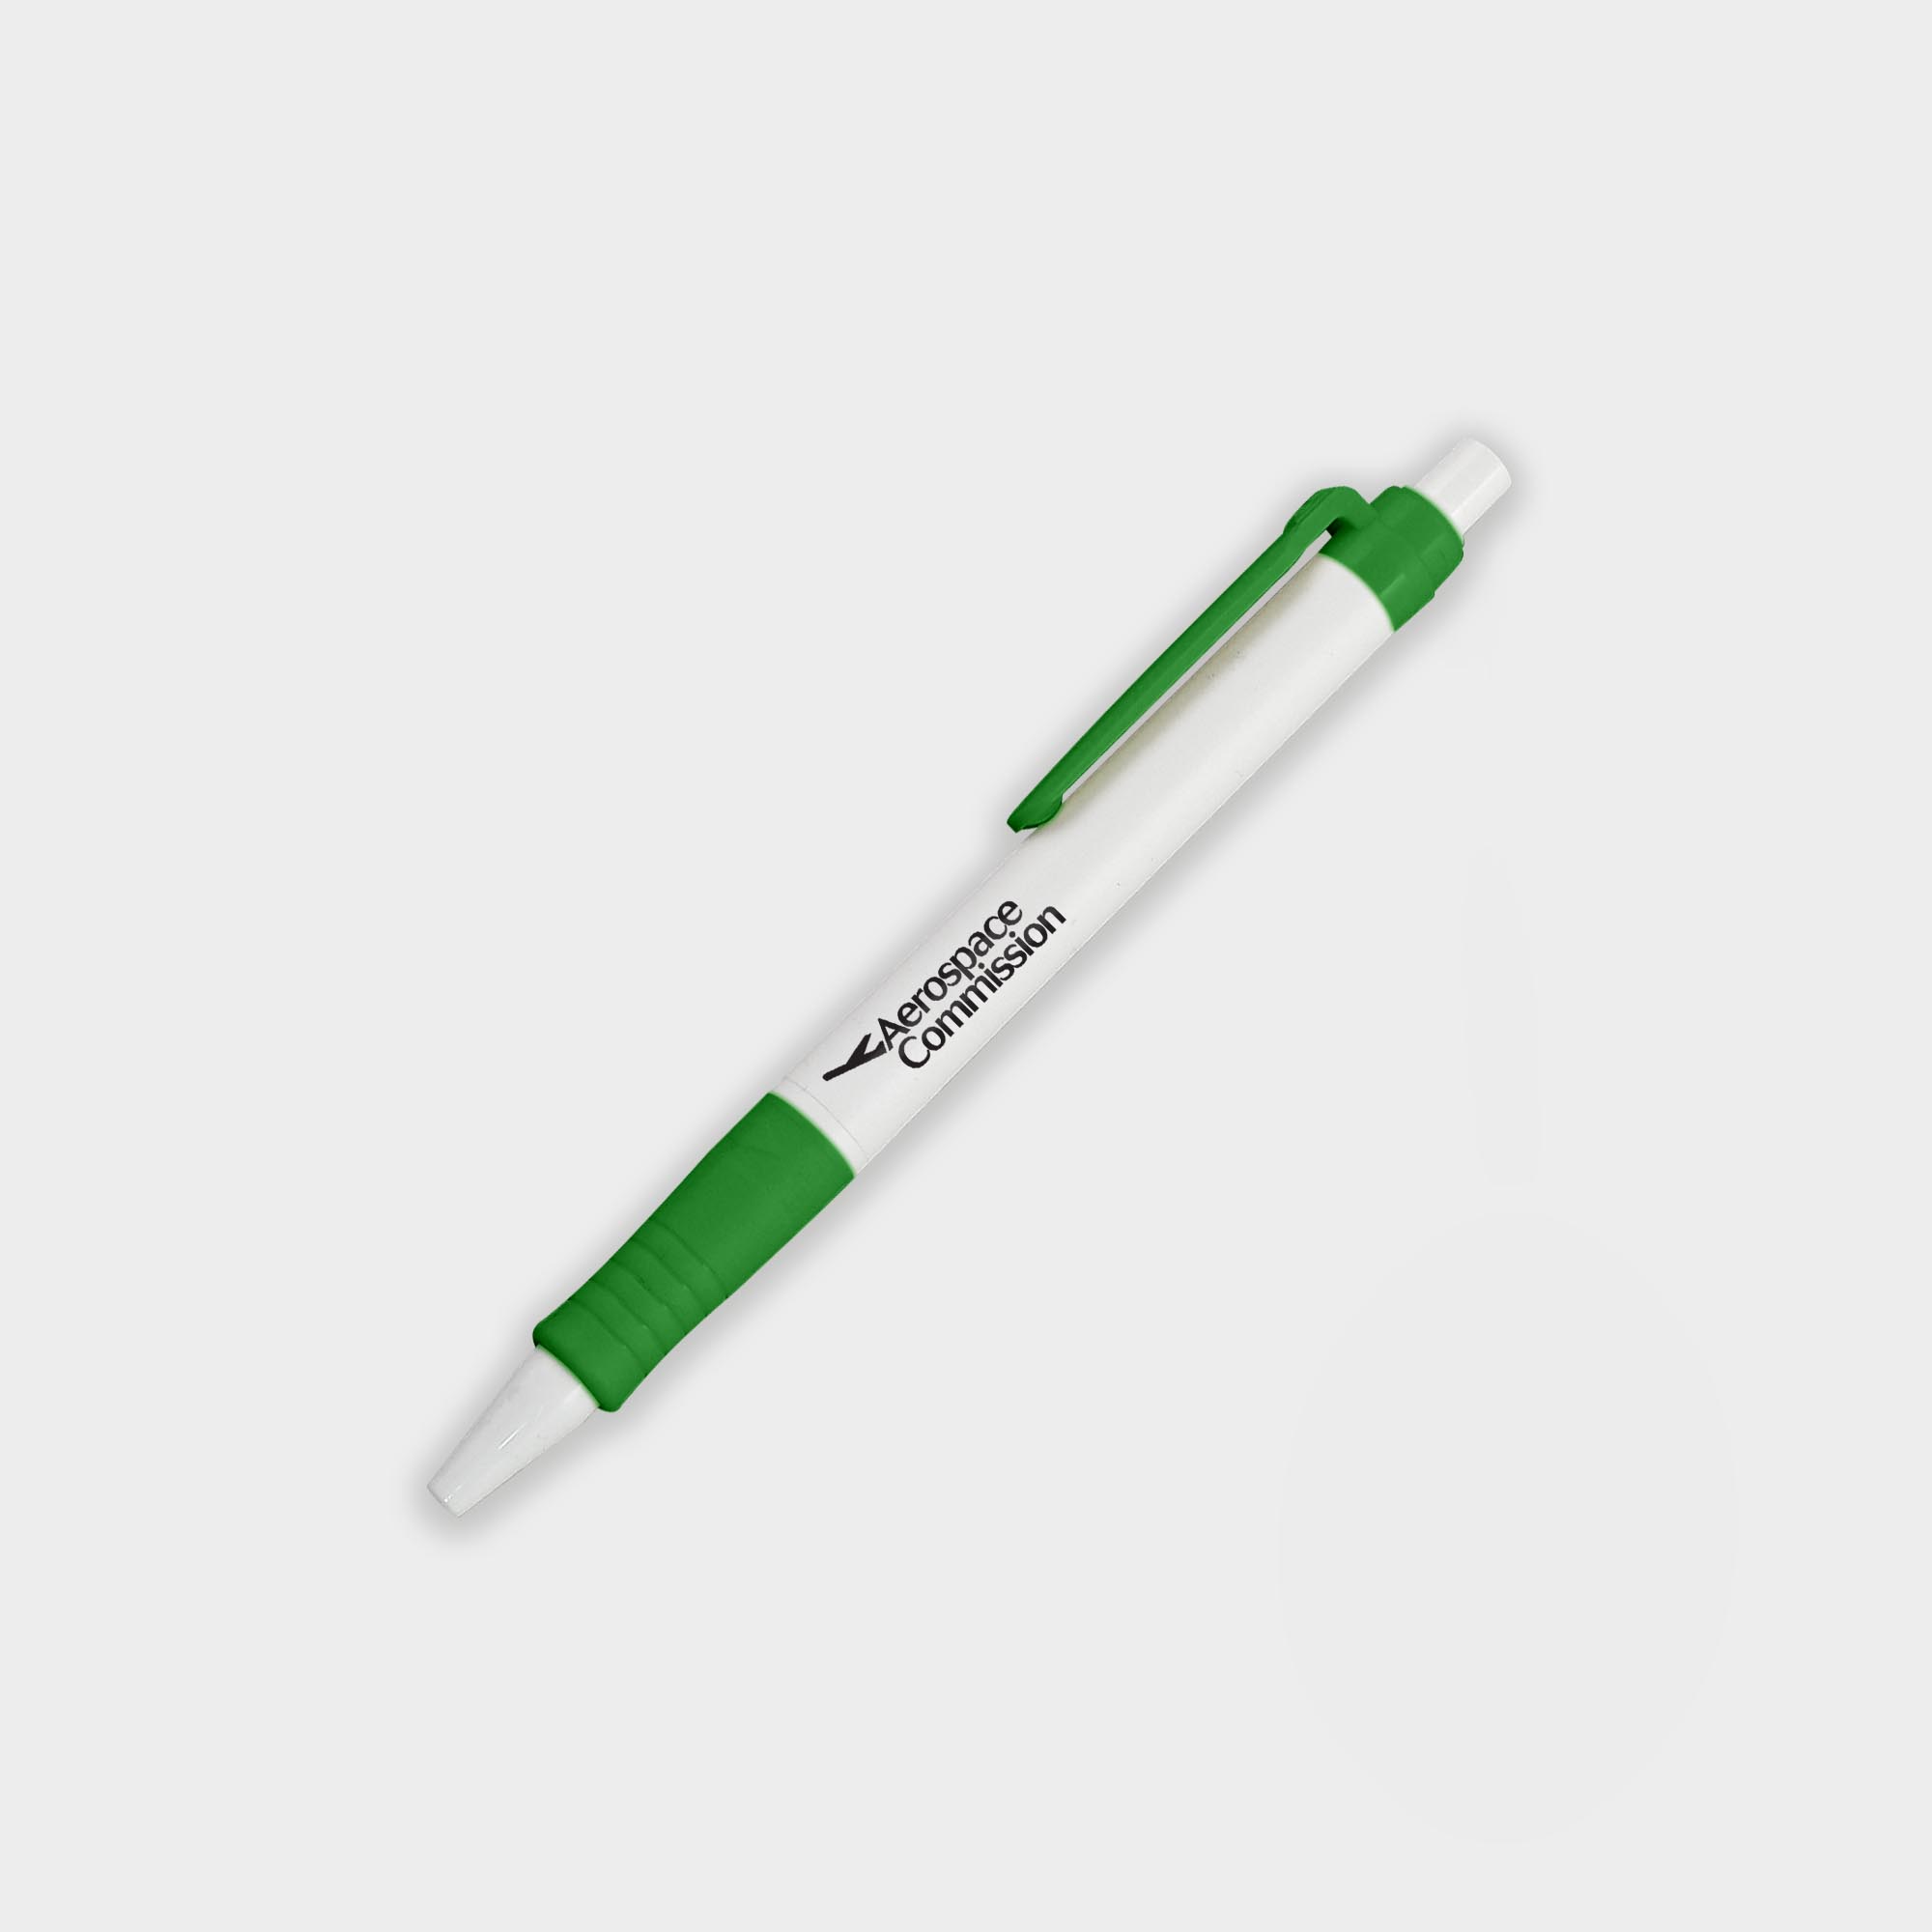 The Green & Good Bio Solid Biodegradable Pen. Corn based plastic pen with a solid coloured body and a push button. Available in a wide range of trim colours. Black ink as standard. White / Green